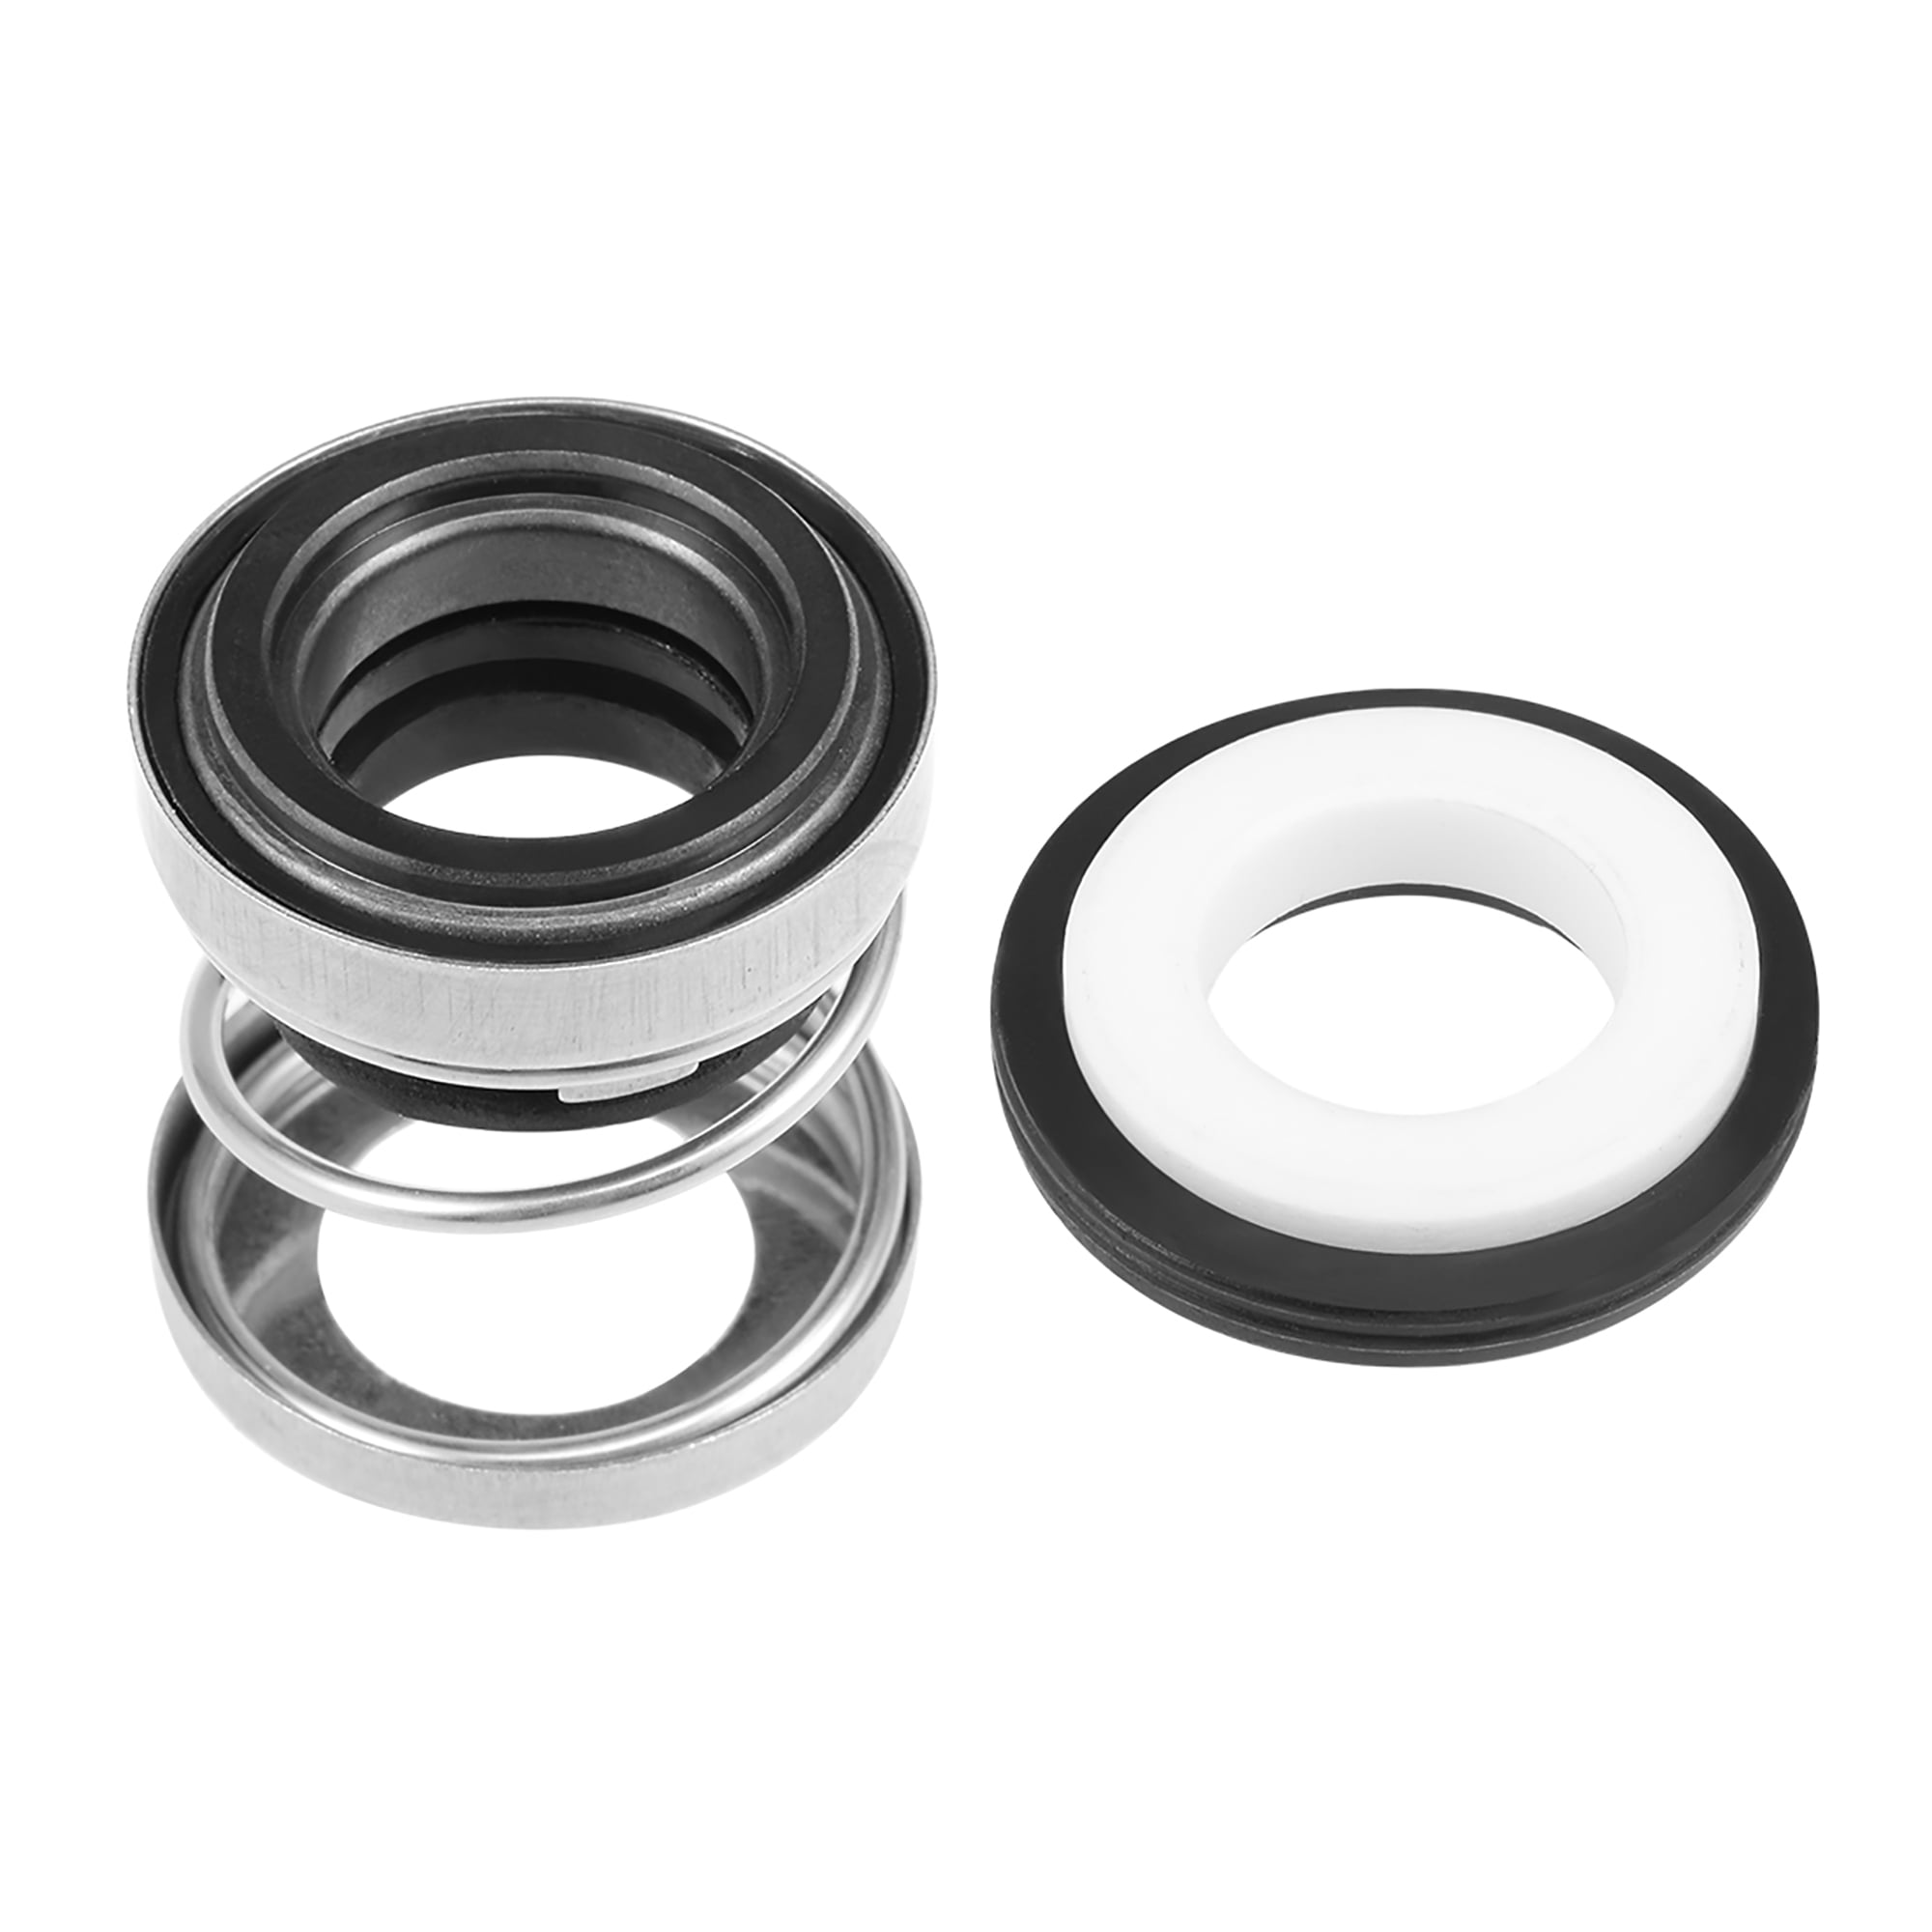 Mechanical Shaft Seal Replacement for Pool Spa Pump 3pcs XJ-16 